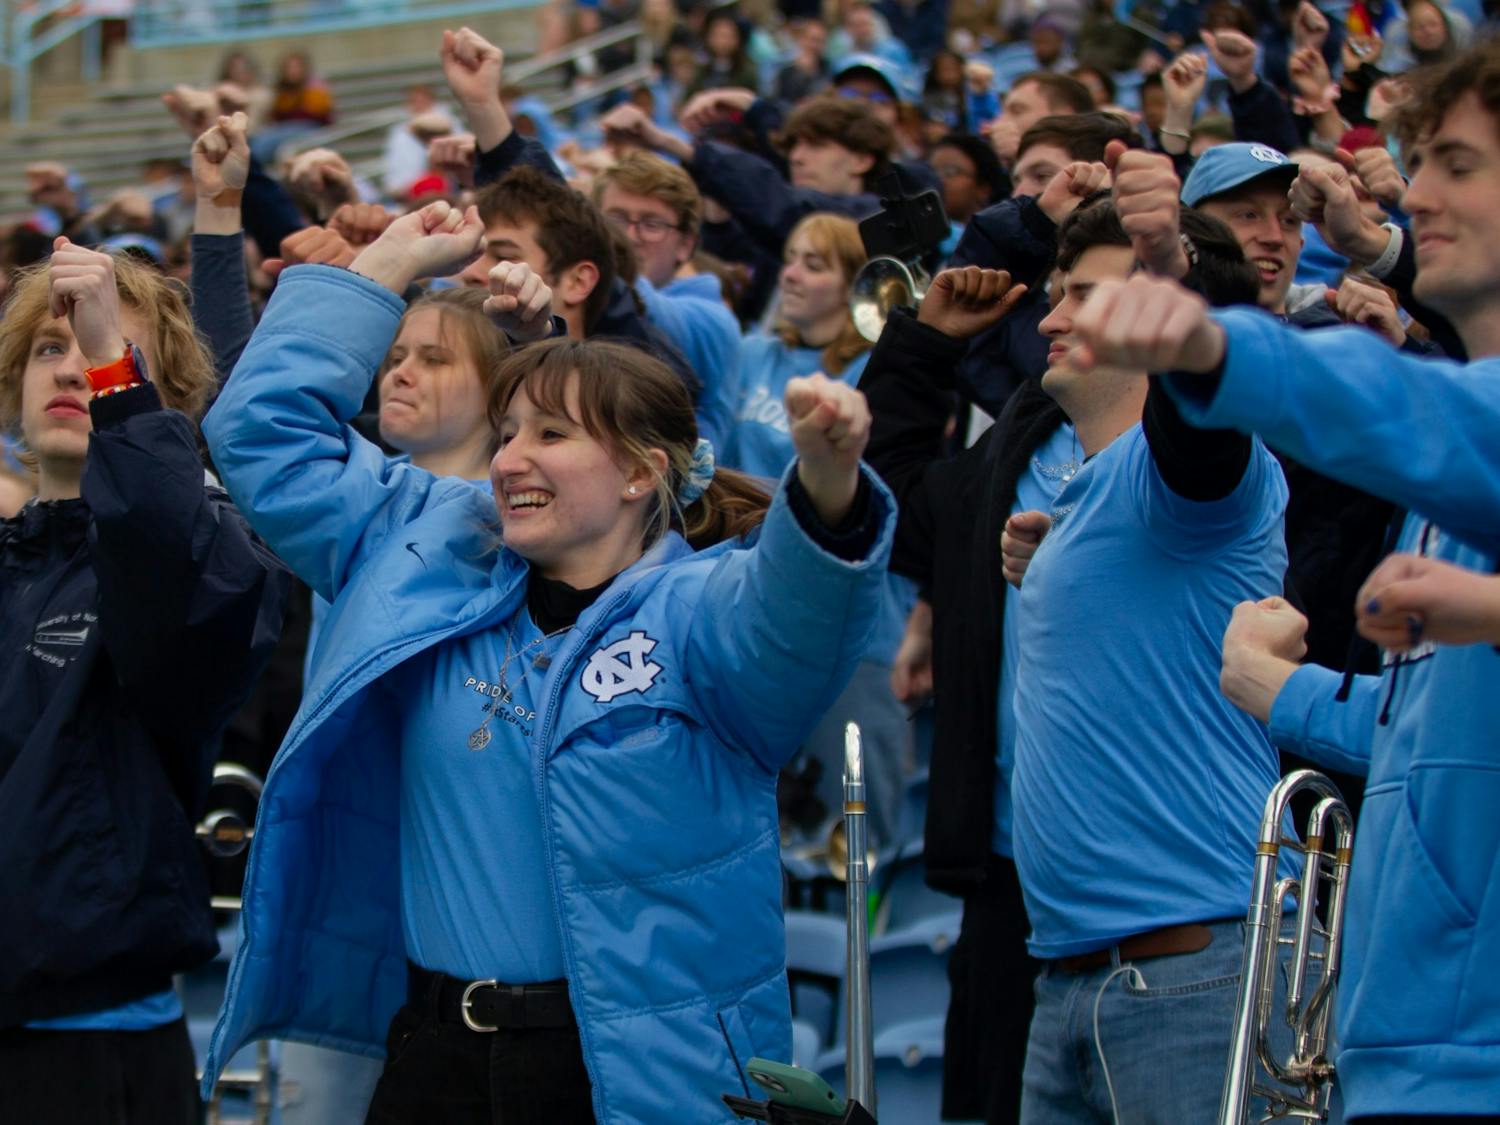 Members of UNC's Marching Tar Heels dance to a song during UNC football's spring scrimmage on April 9, 2022, in Chapel Hill, NC.